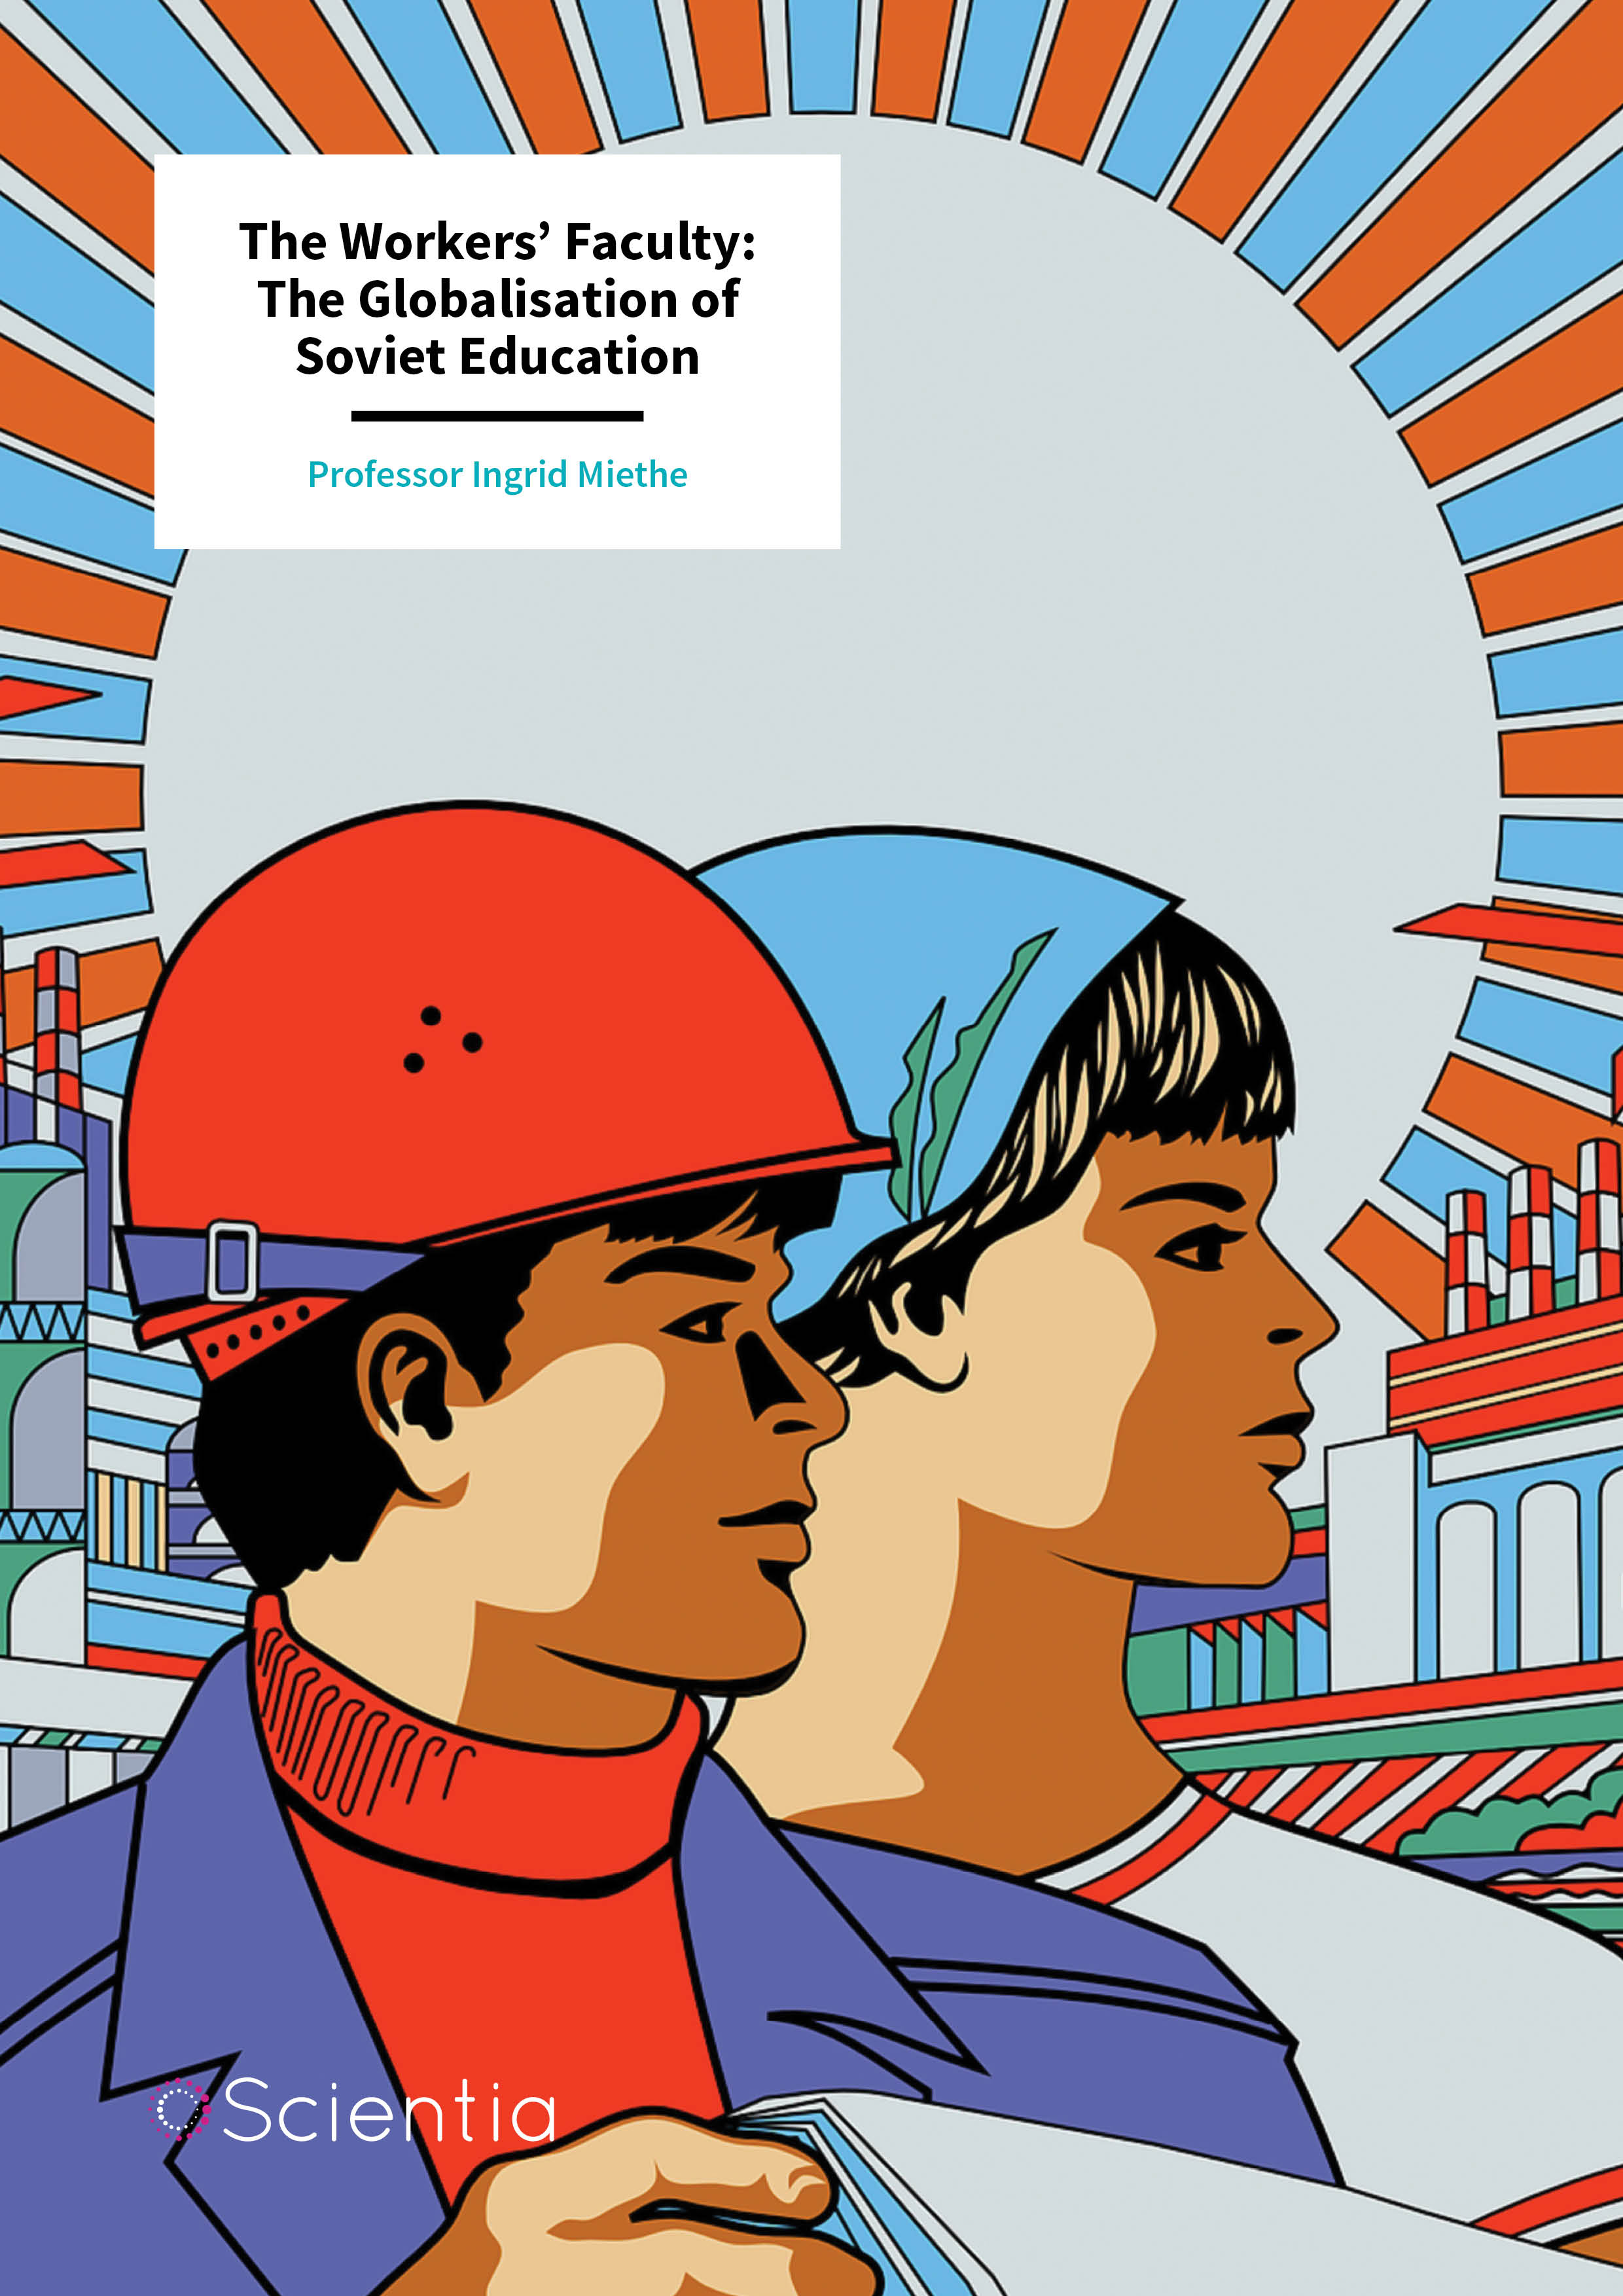 Professor Ingrid Miethe – The Workers’ Faculty: The Globalisation of Soviet Education